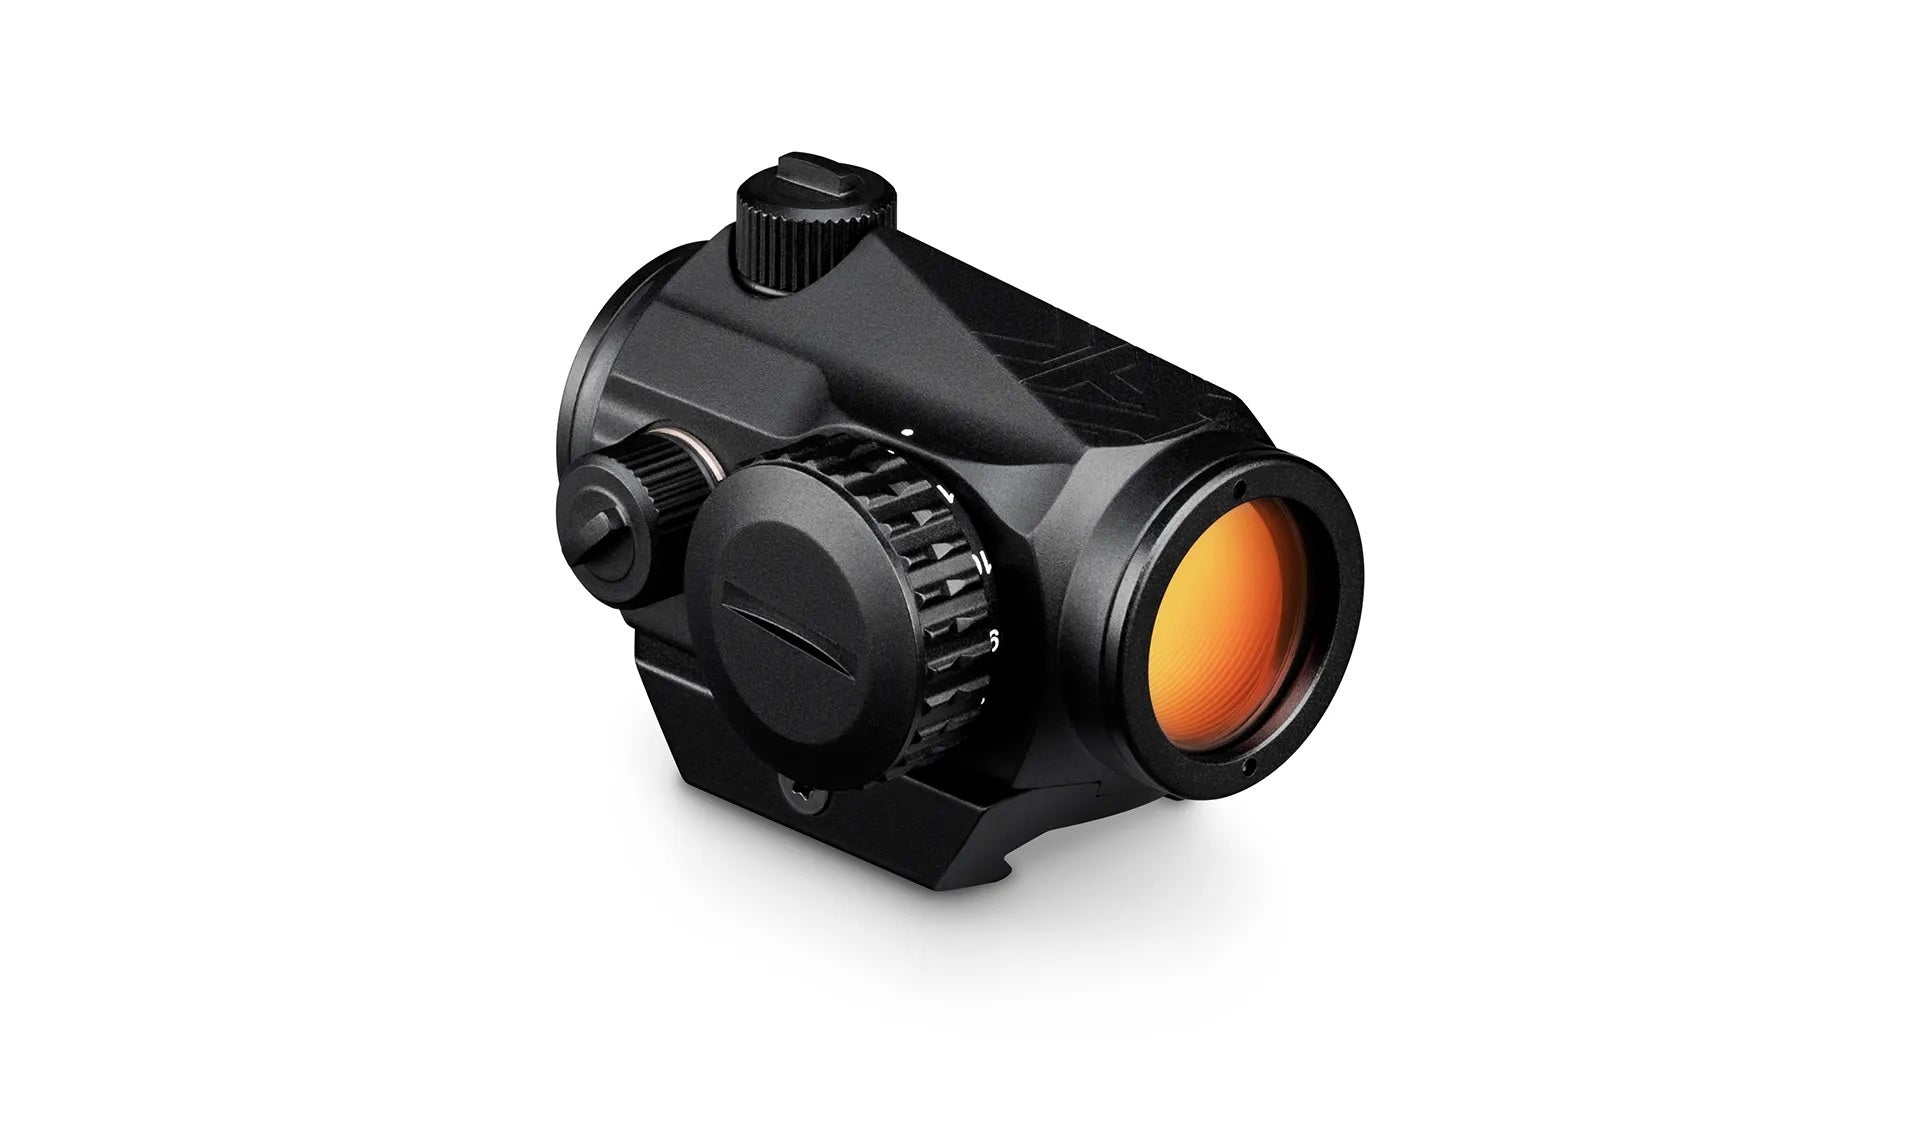 Vortex Crossfire Red Dot, 2 MOA Dot Reticle, CF-RD2